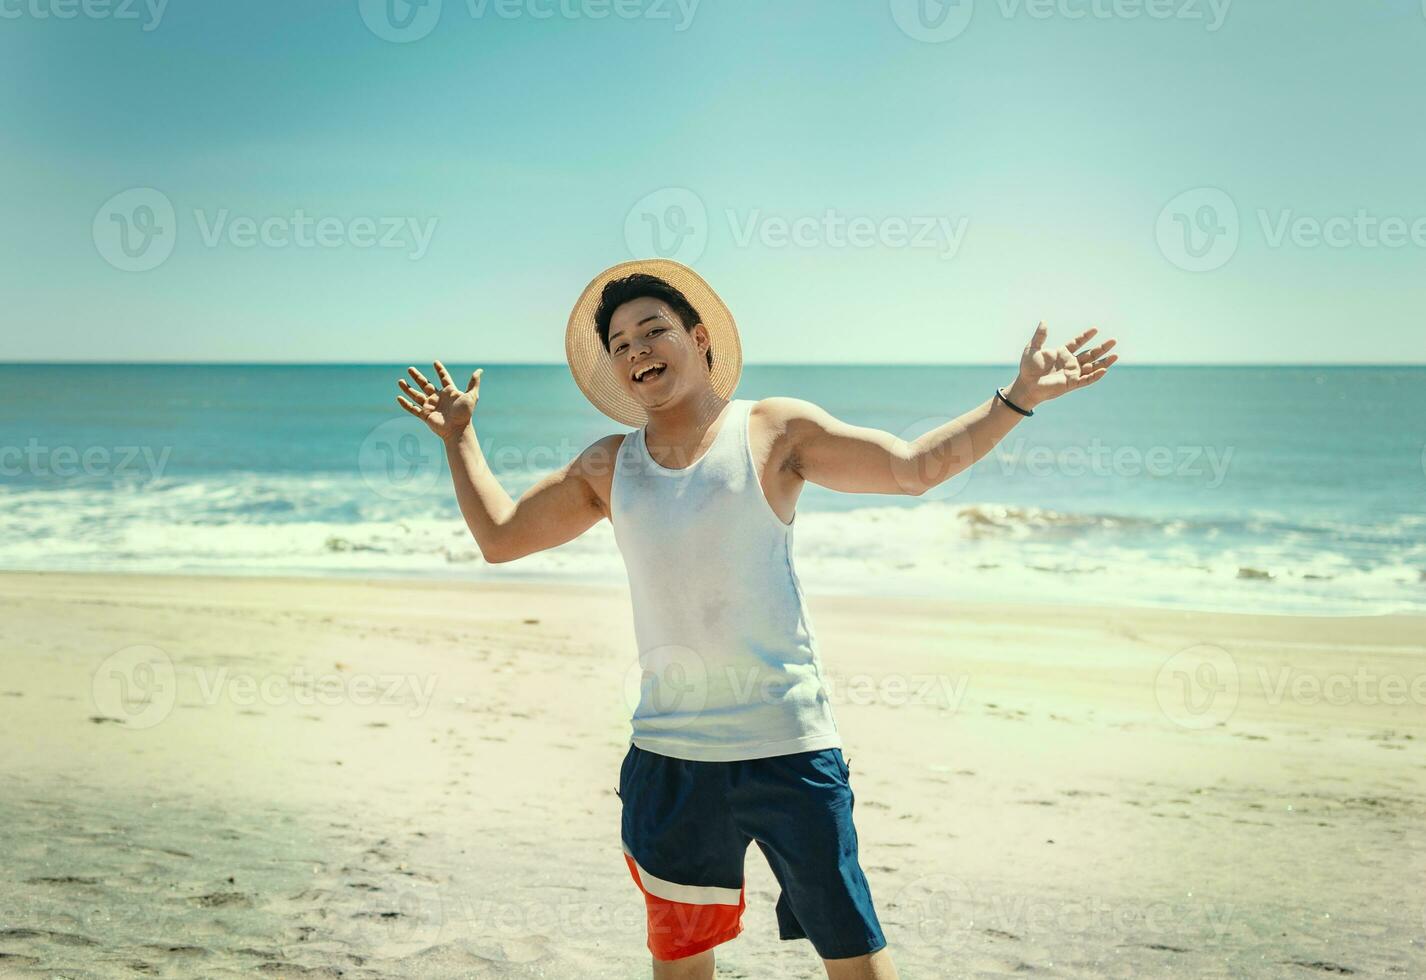 Portrait of man in hat on the beach spreading his arms. Smiling young man on the beach spreading arms looking at camera, Concept of man enjoying the beach photo